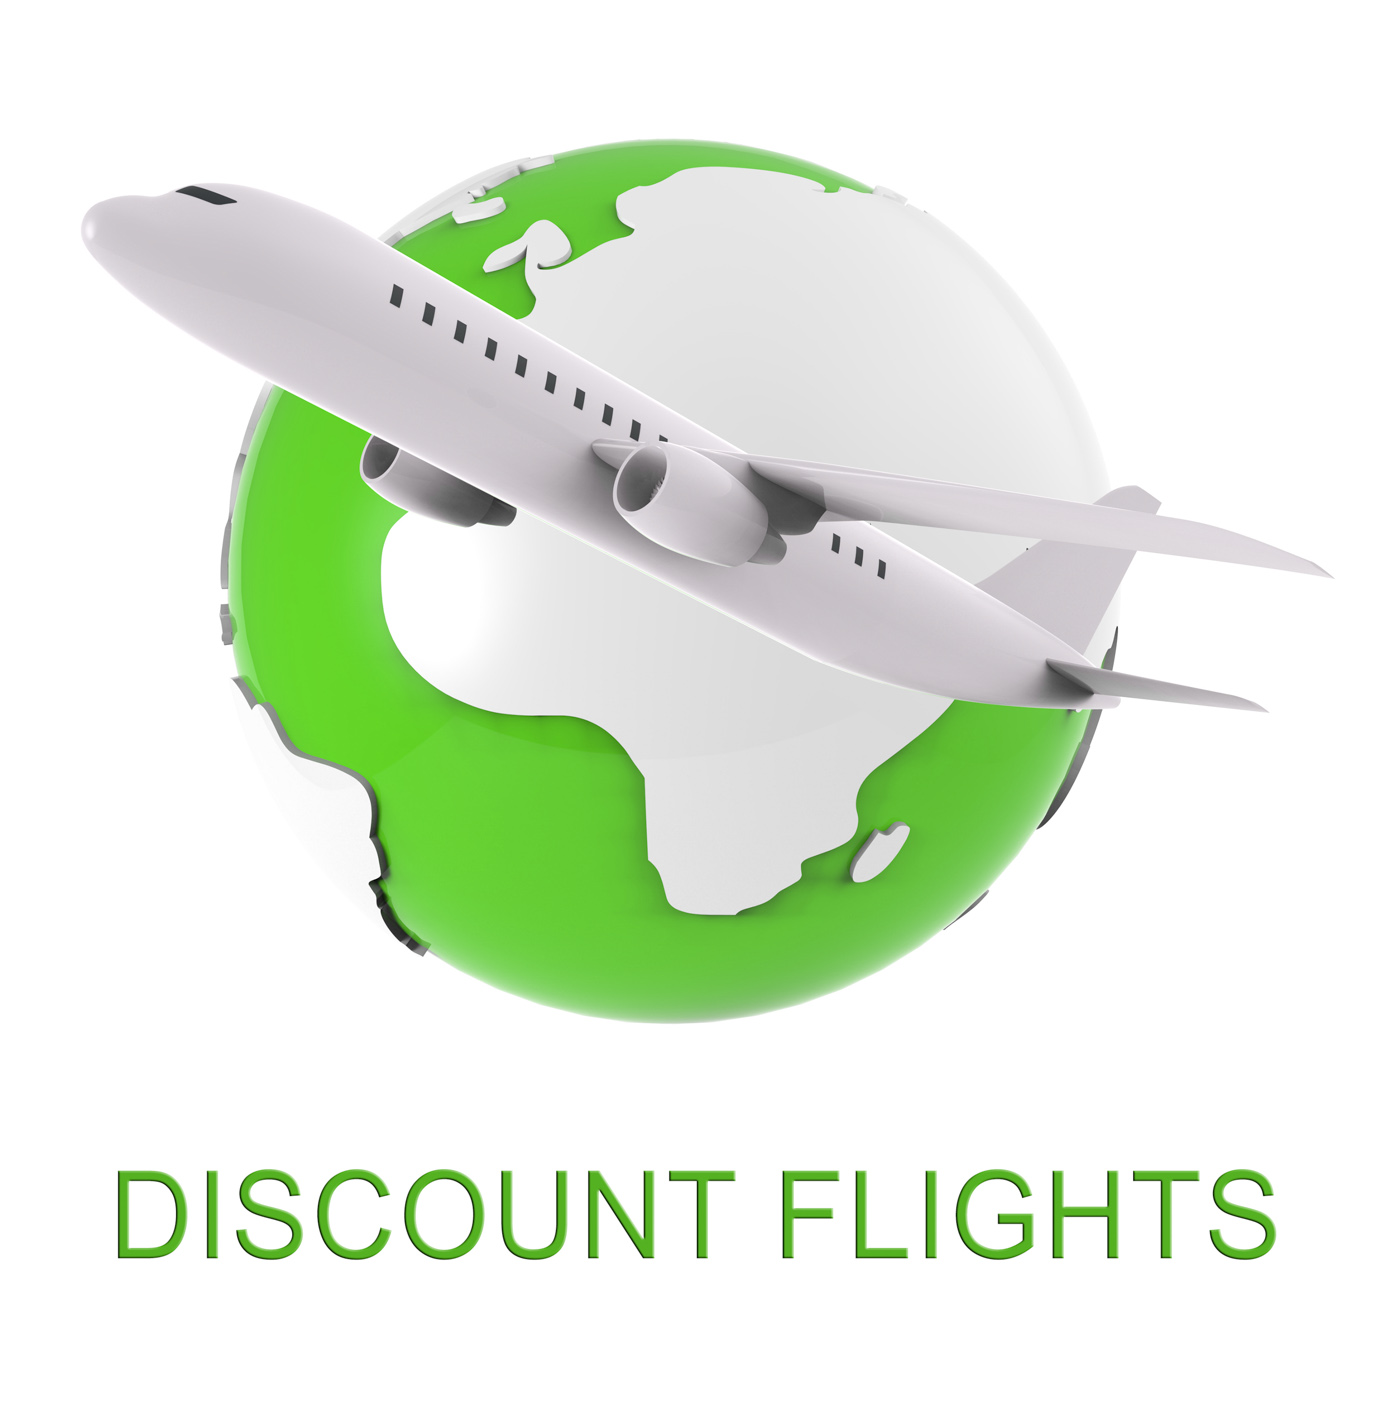 Discount Flights Shows Fly Airline And Air 3d Rendering, 3drendering, Transportation, Transport, Savings, HQ Photo